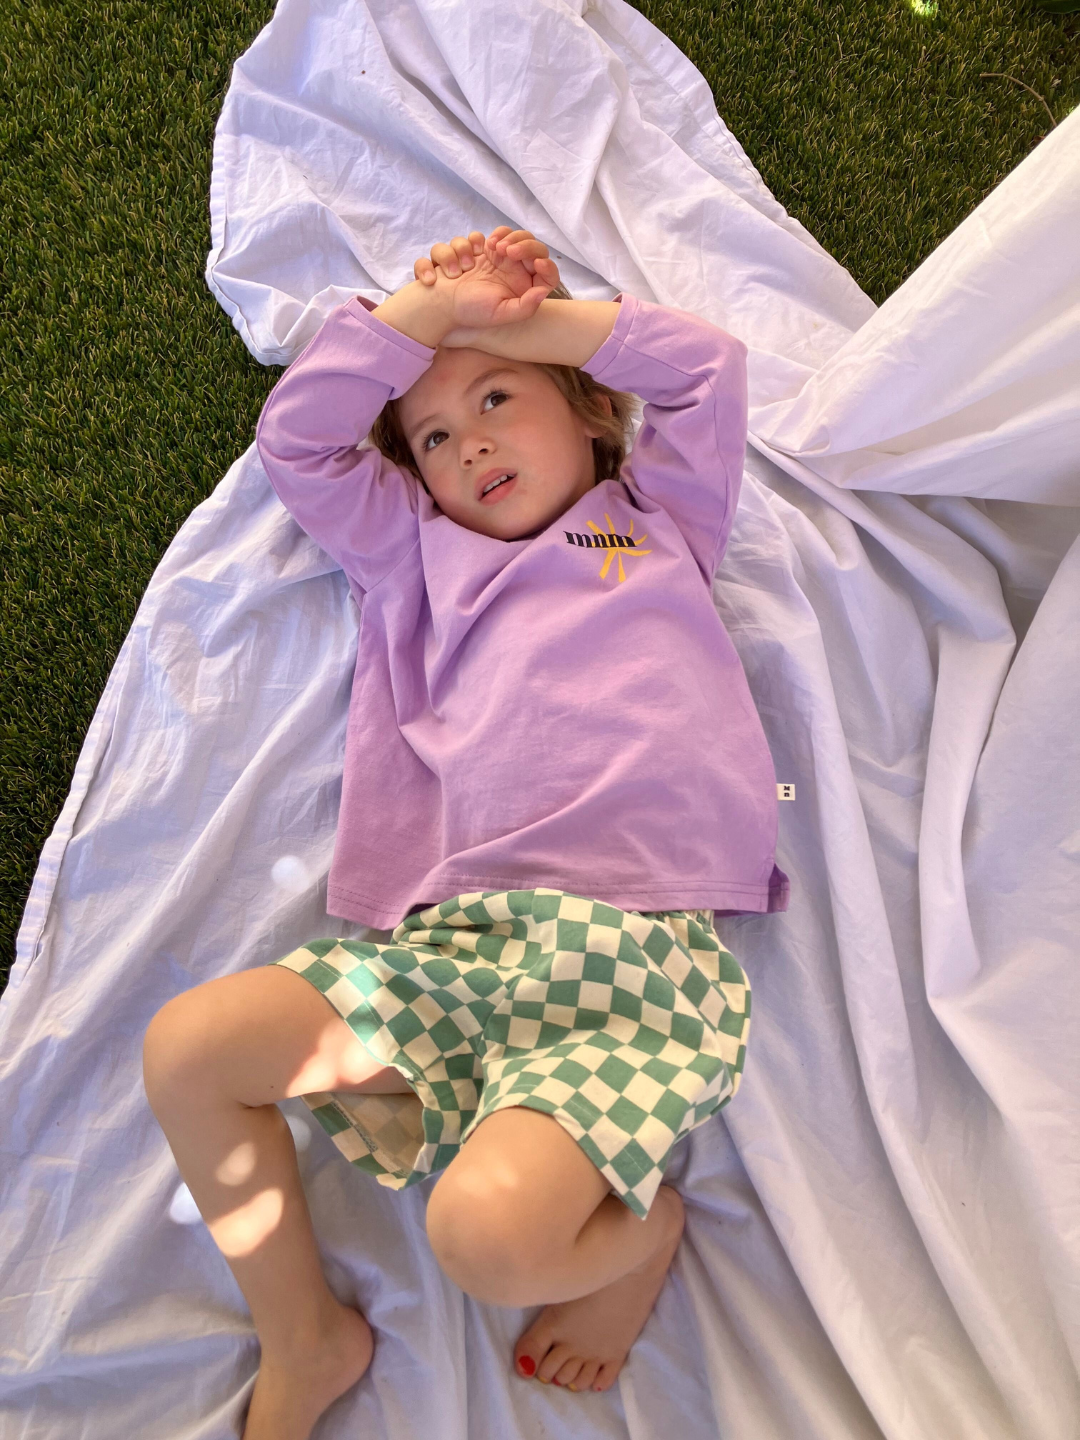 Purple | A child wearing the kids Minimal Longsleeve Tee in purple, paired with checkerboard patterned shorts in teal and ivory. He is lying on a white picnic cloth on grass.